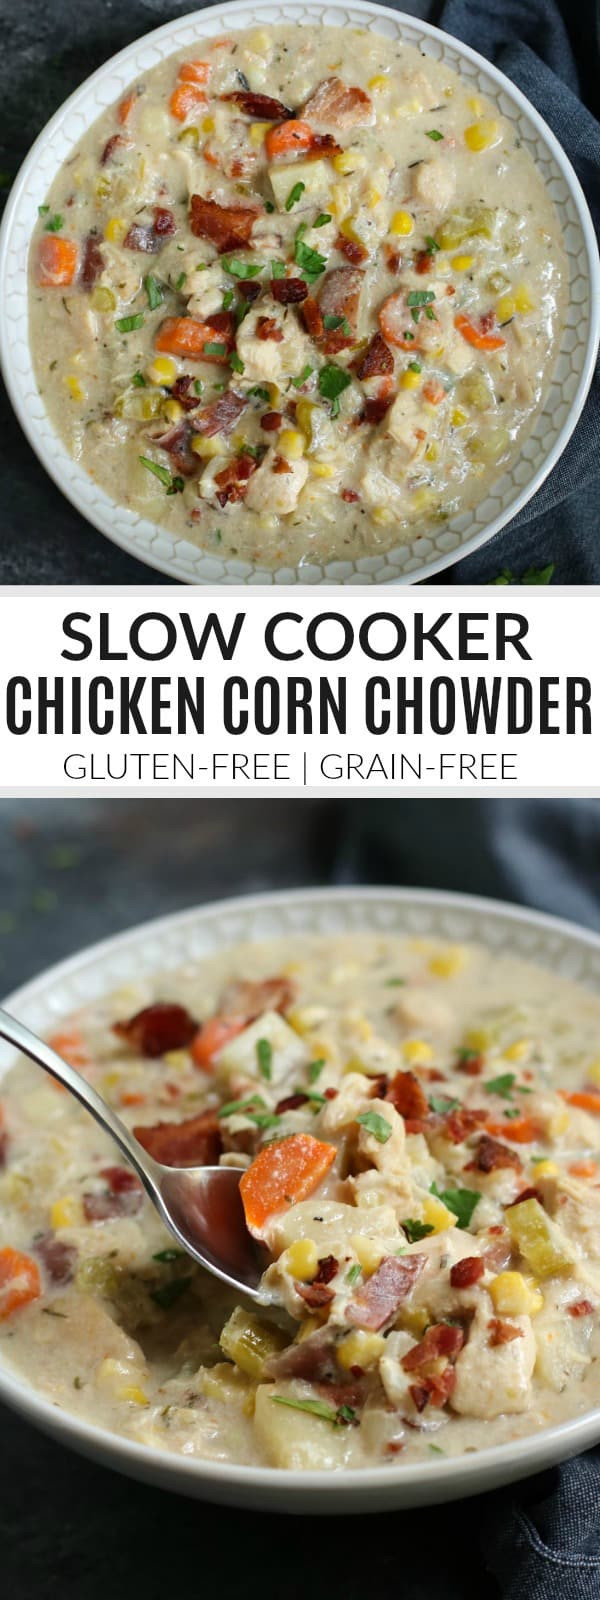 Chicken Corn Chowder Slow Cooker
 Slow Cooker Chicken Corn Chowder The Real Food Dietitians